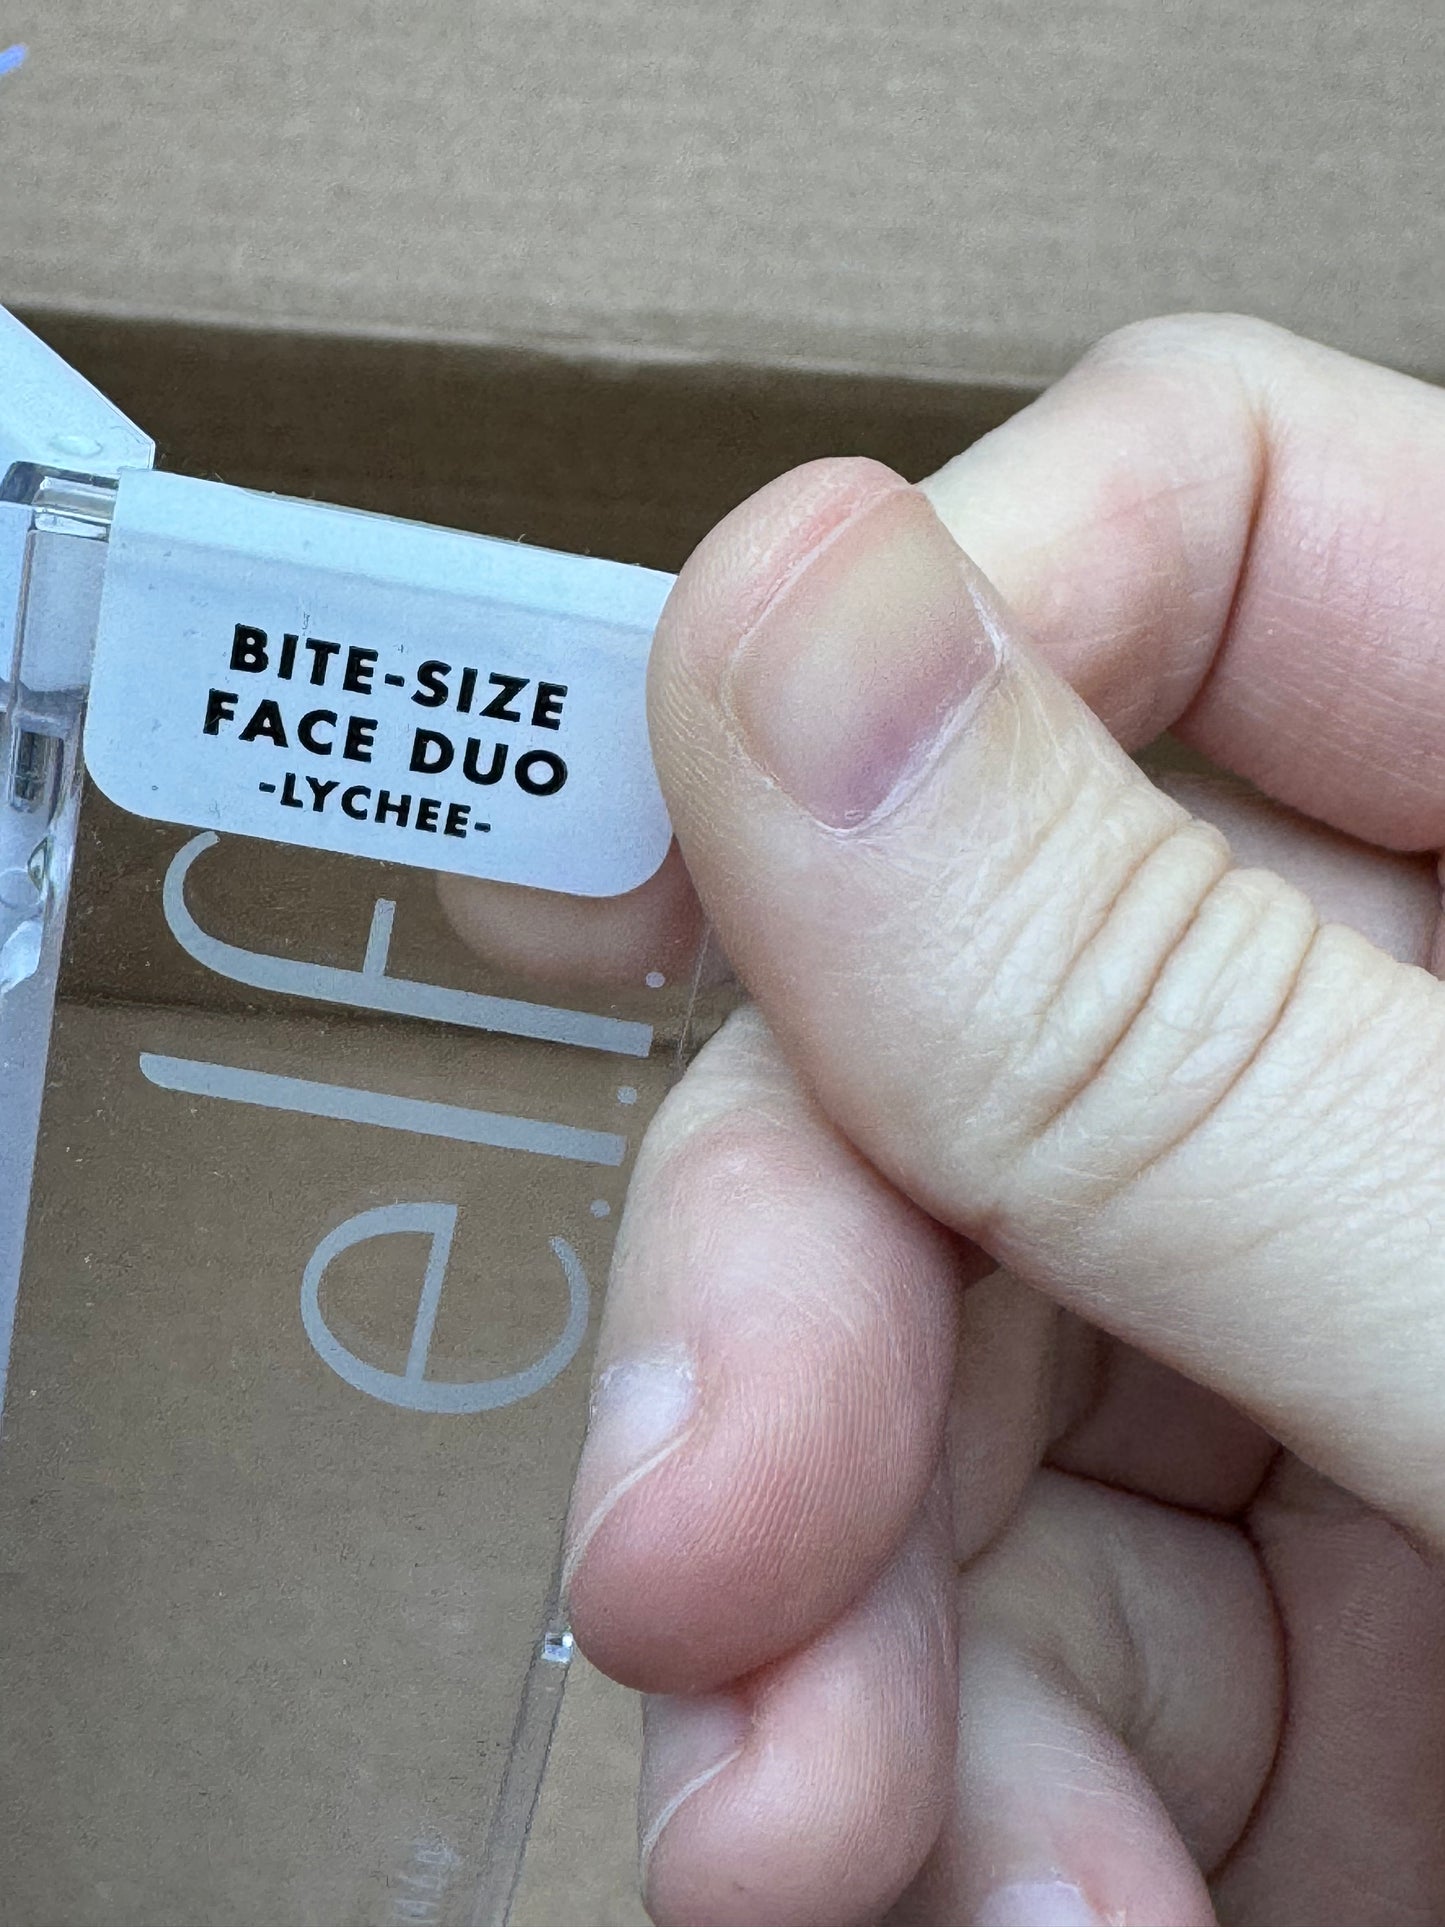 Elf Cosmetics Bite-Size Face Duo in Lychee